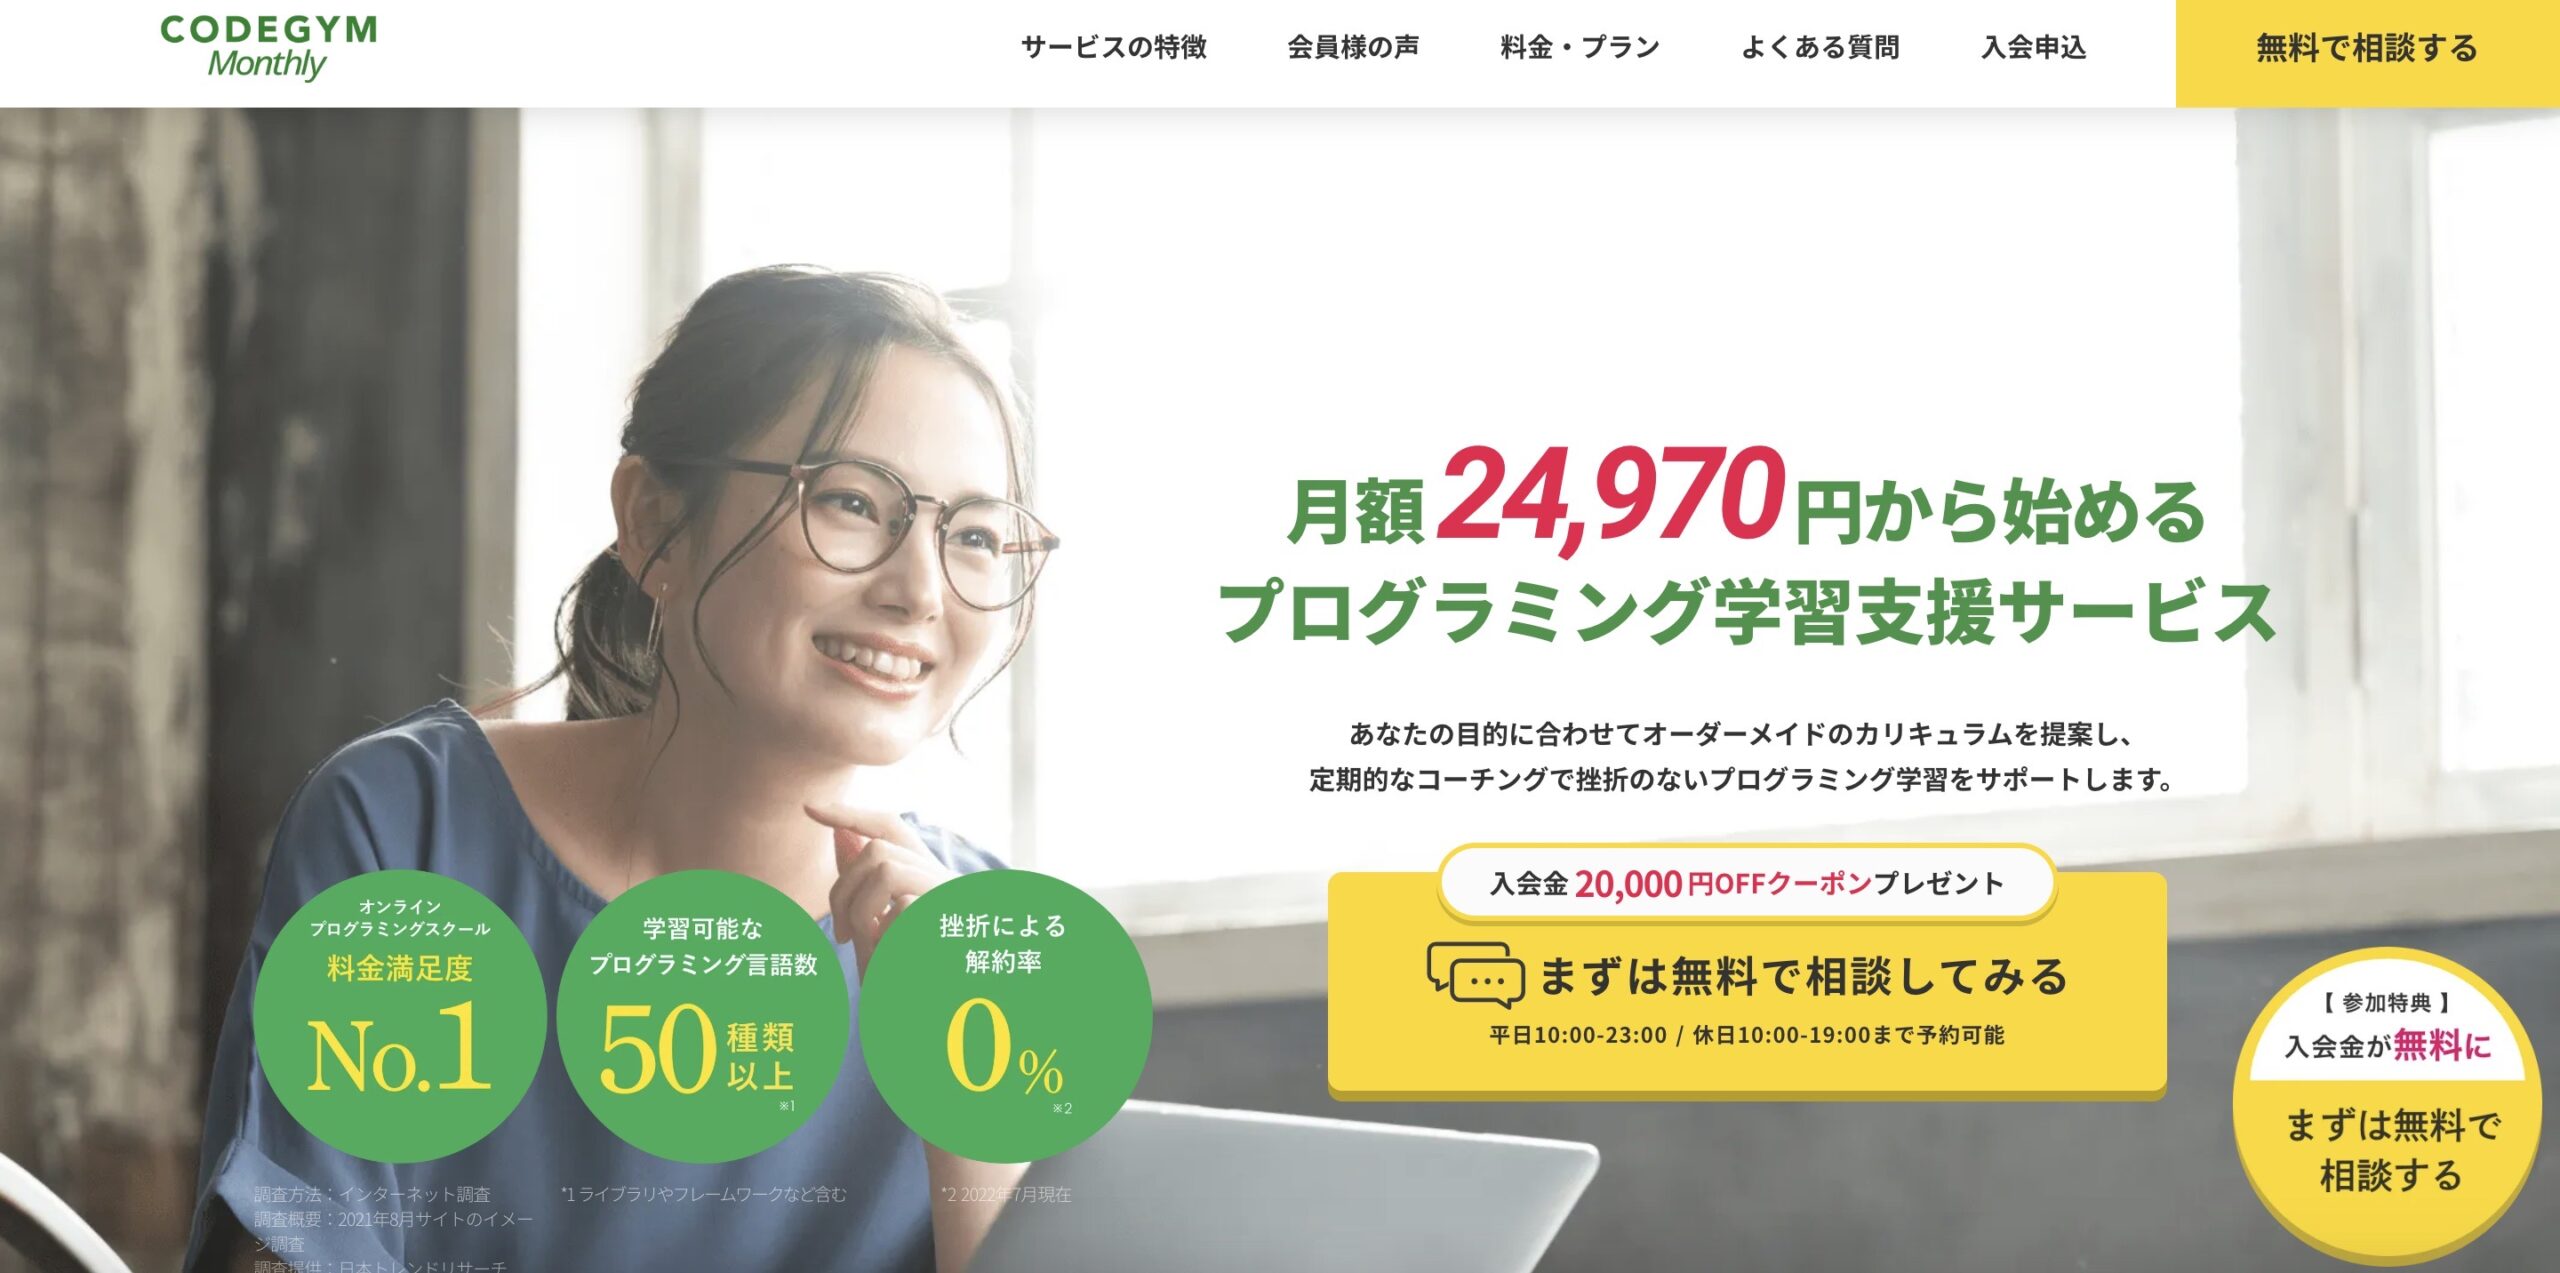 CODEGYM Monthly公式